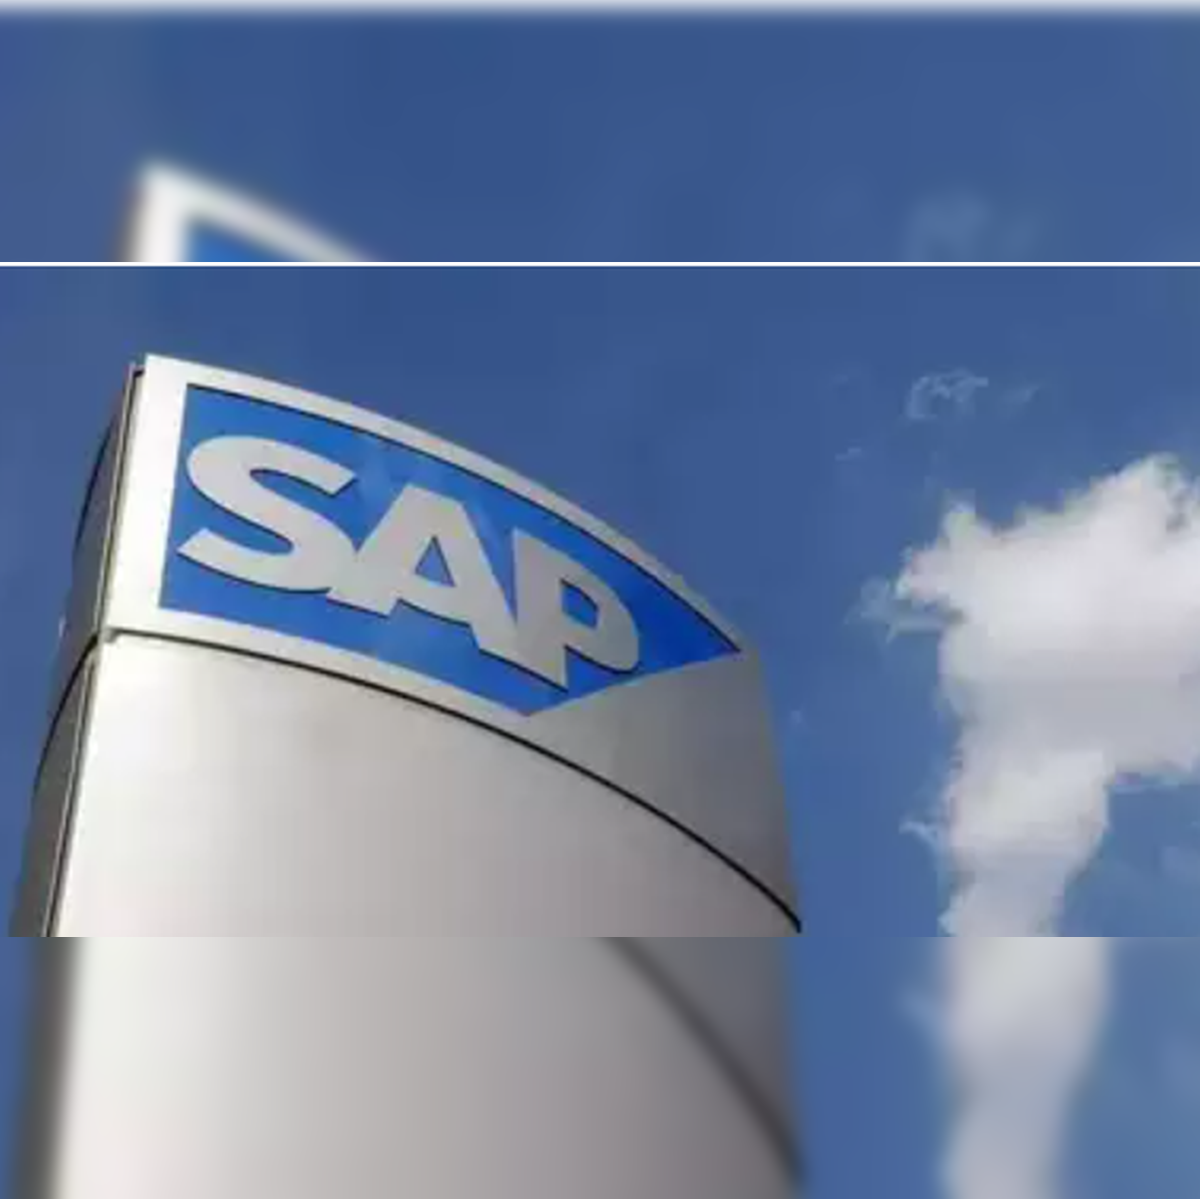 SAP to restructure 8,000 roles in push towards AI